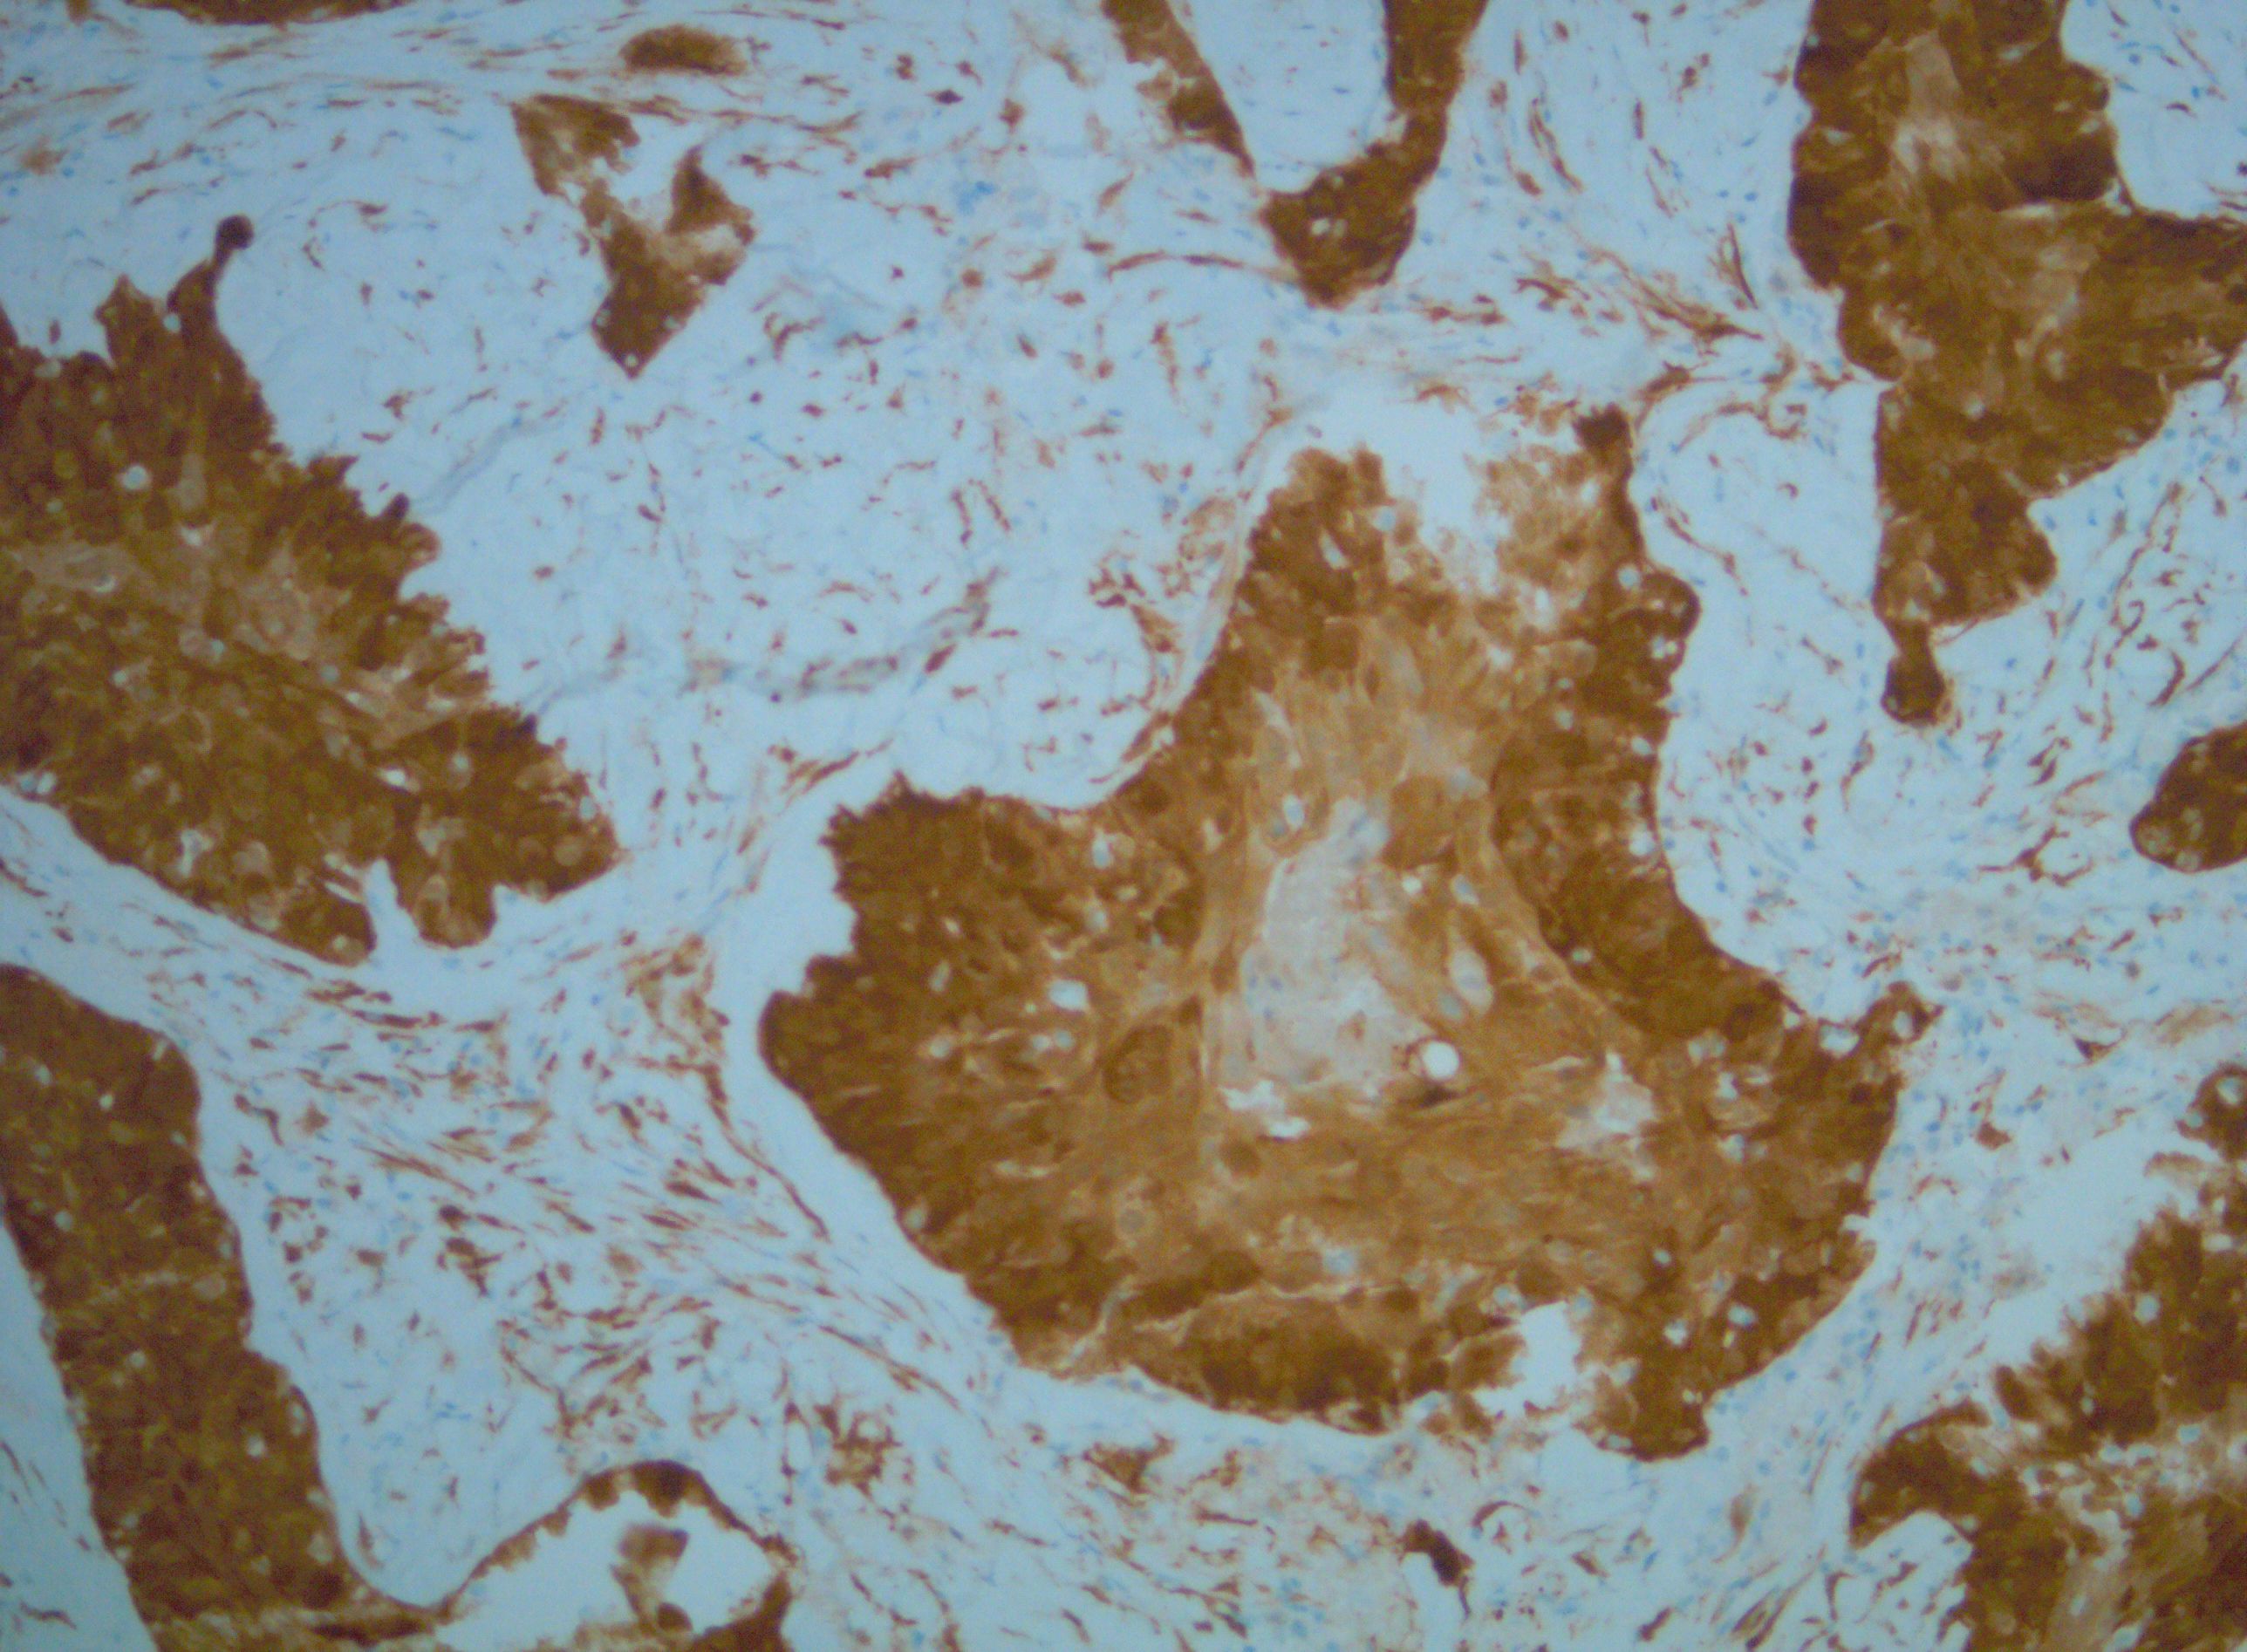 HPV-positive Squamous Cell Carcinoma (SCC) of the Palate with P16 (+) staining